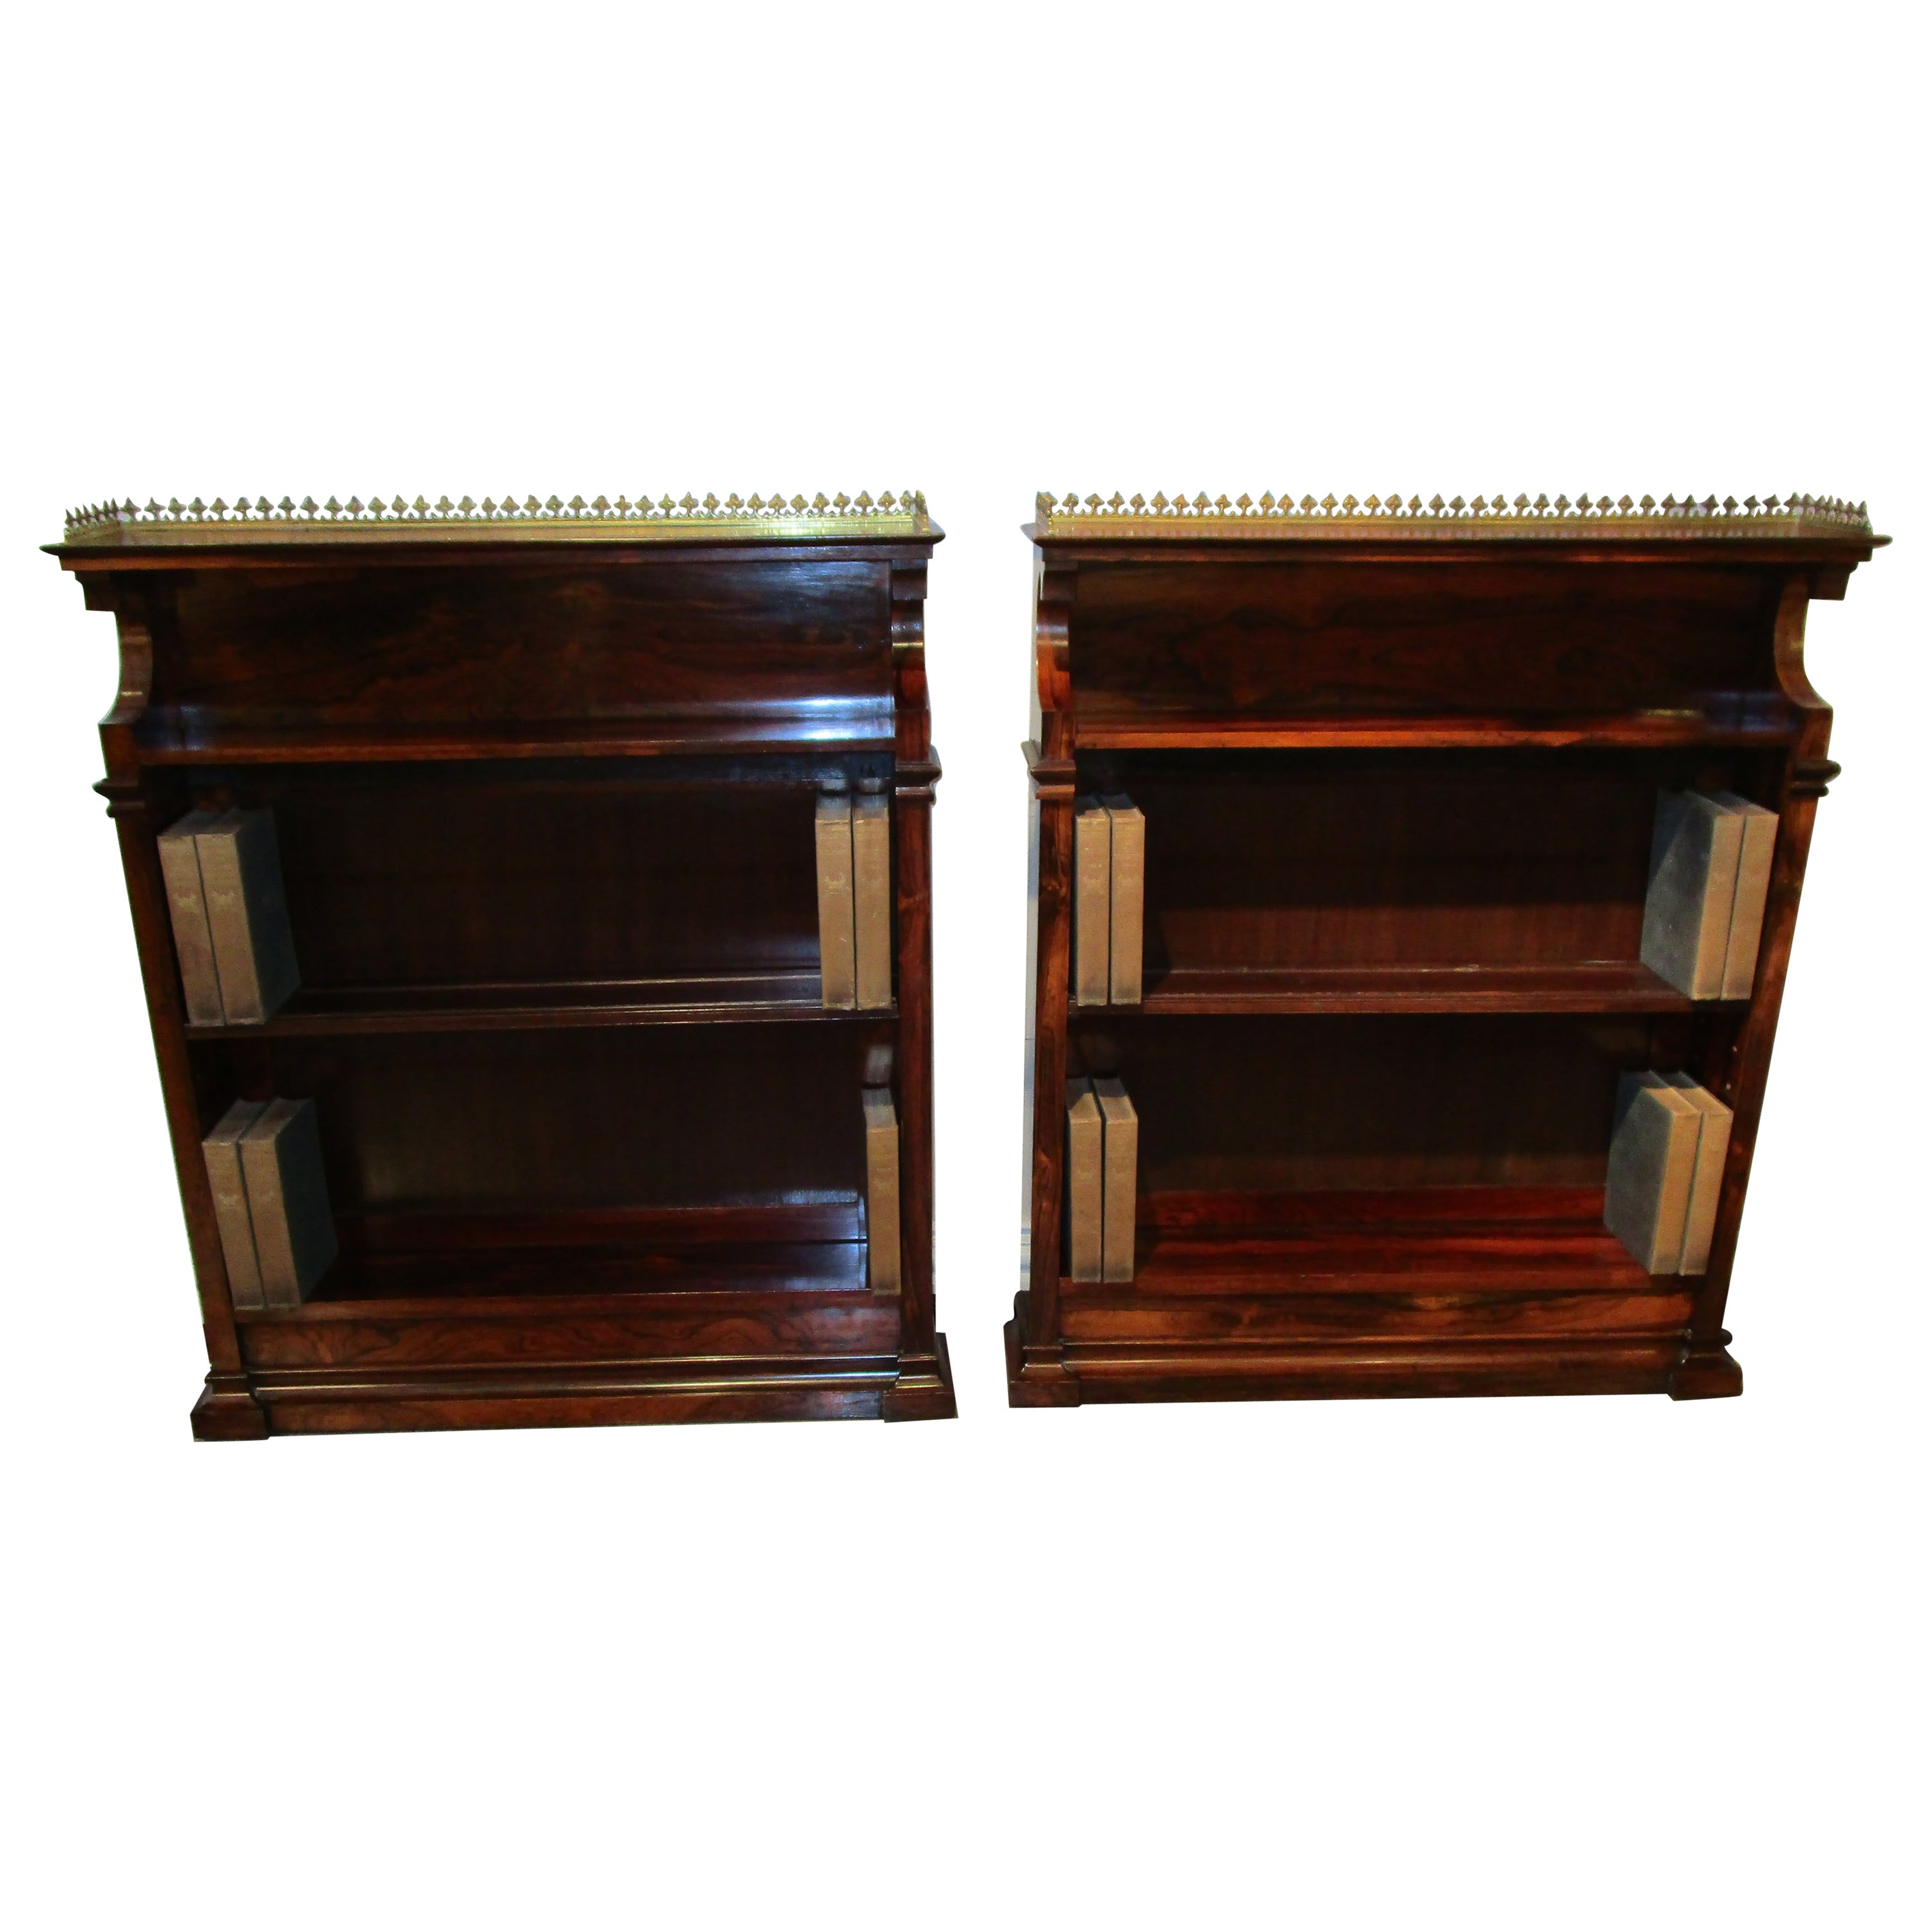 Fine Pair of 19th Century Regency Rosewood Bookcases with Gilt Brass Railings